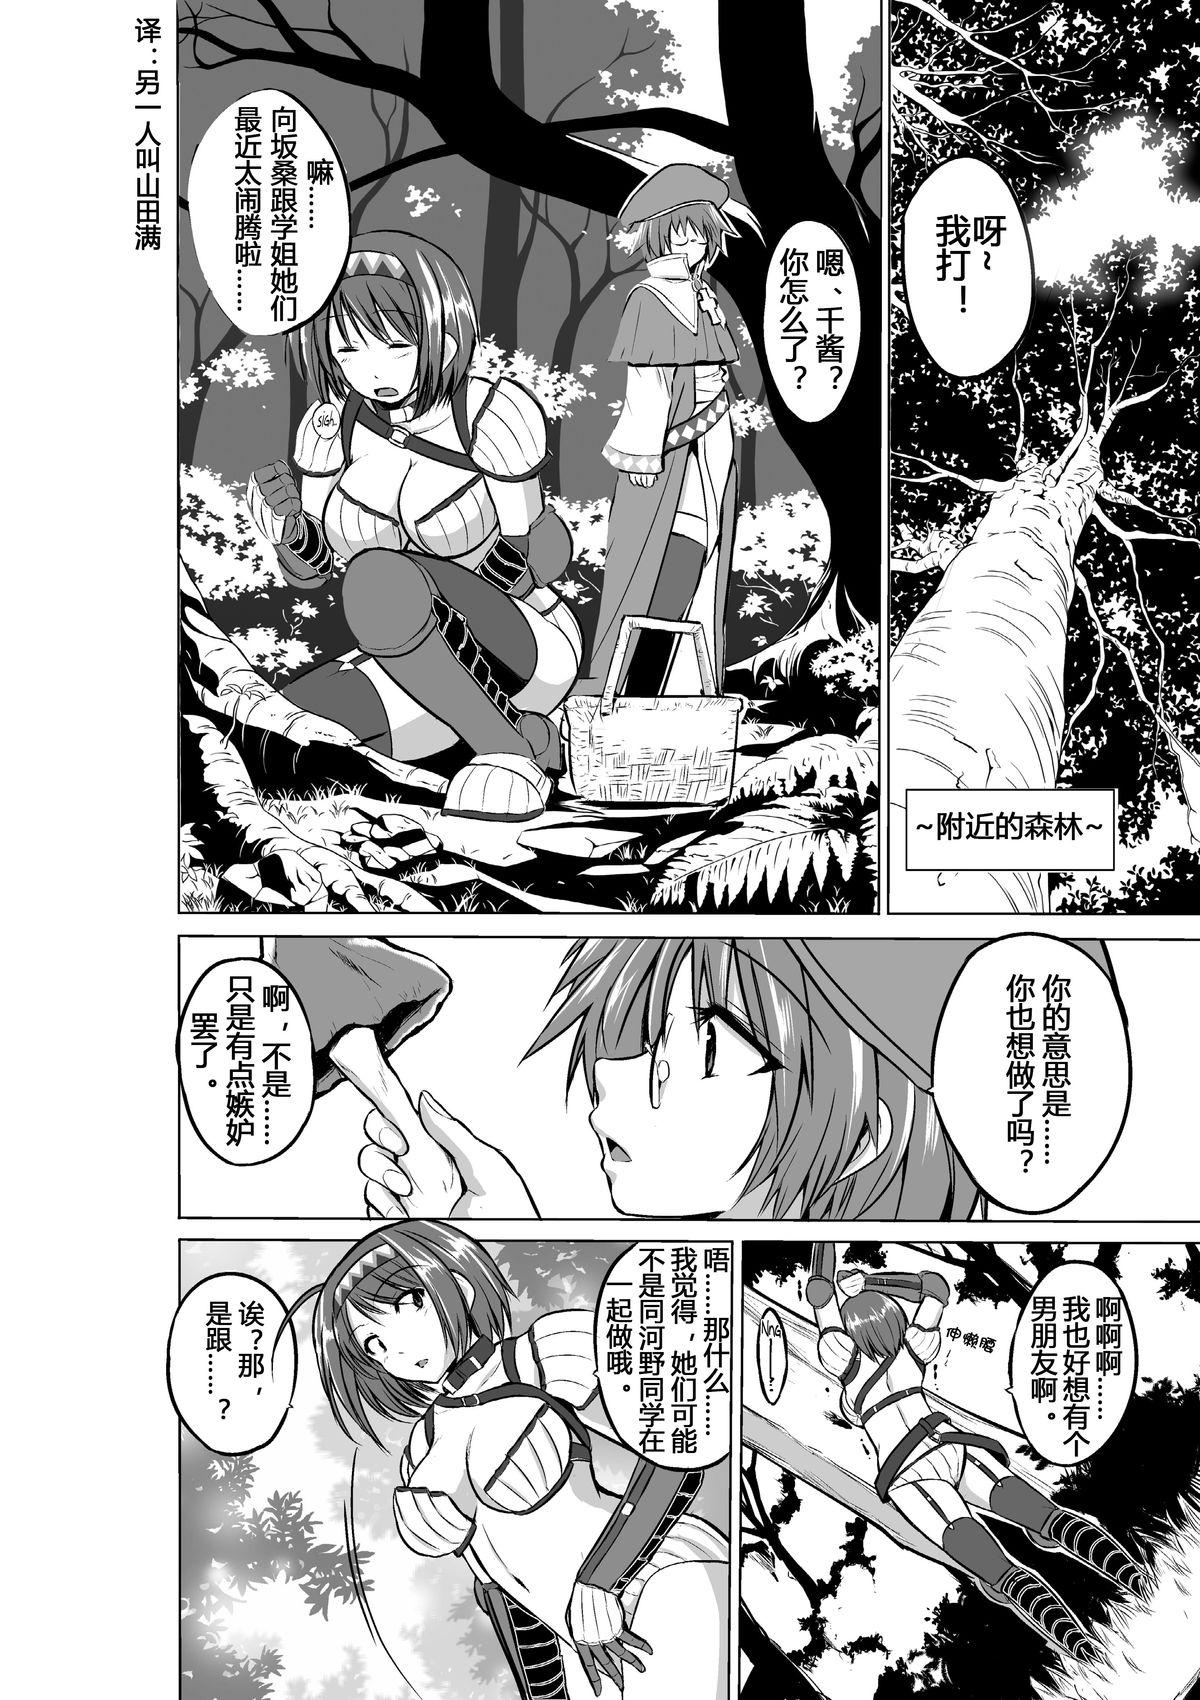 3some Dungeon Travelers - Chie no Himegoto - Toheart2 Doctor - Page 4